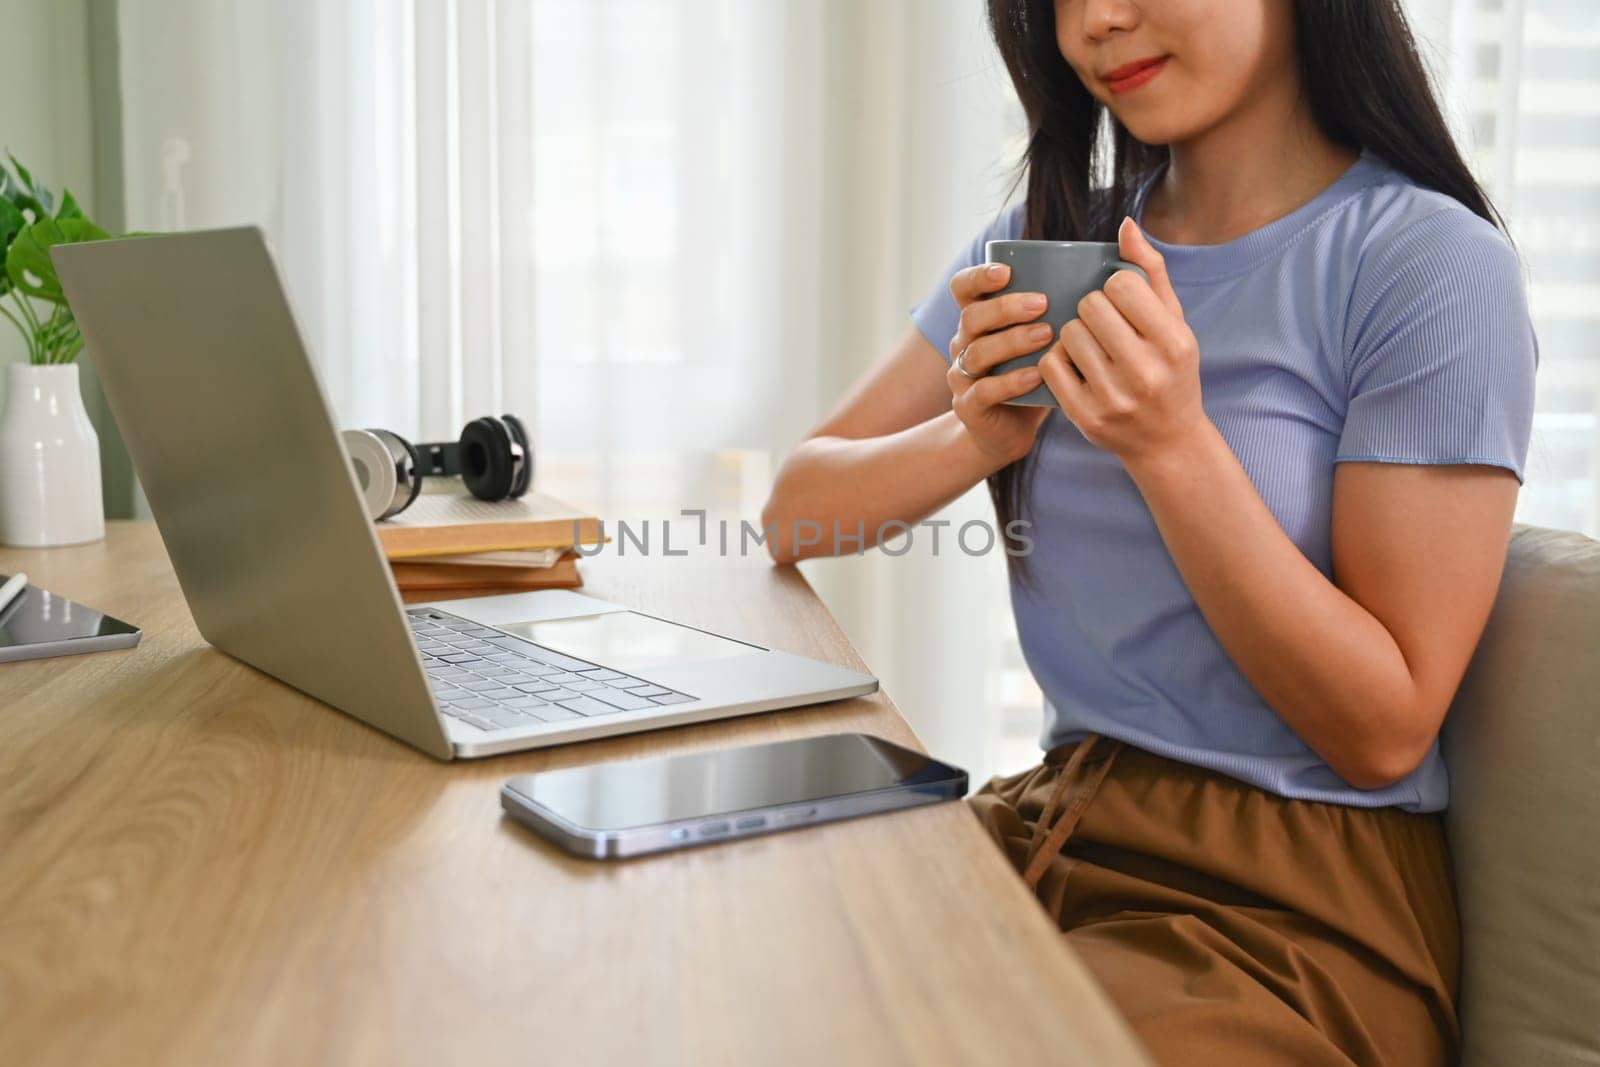 Smiling young woman in casual clothes drinking tea and reading email or news on laptop computer.